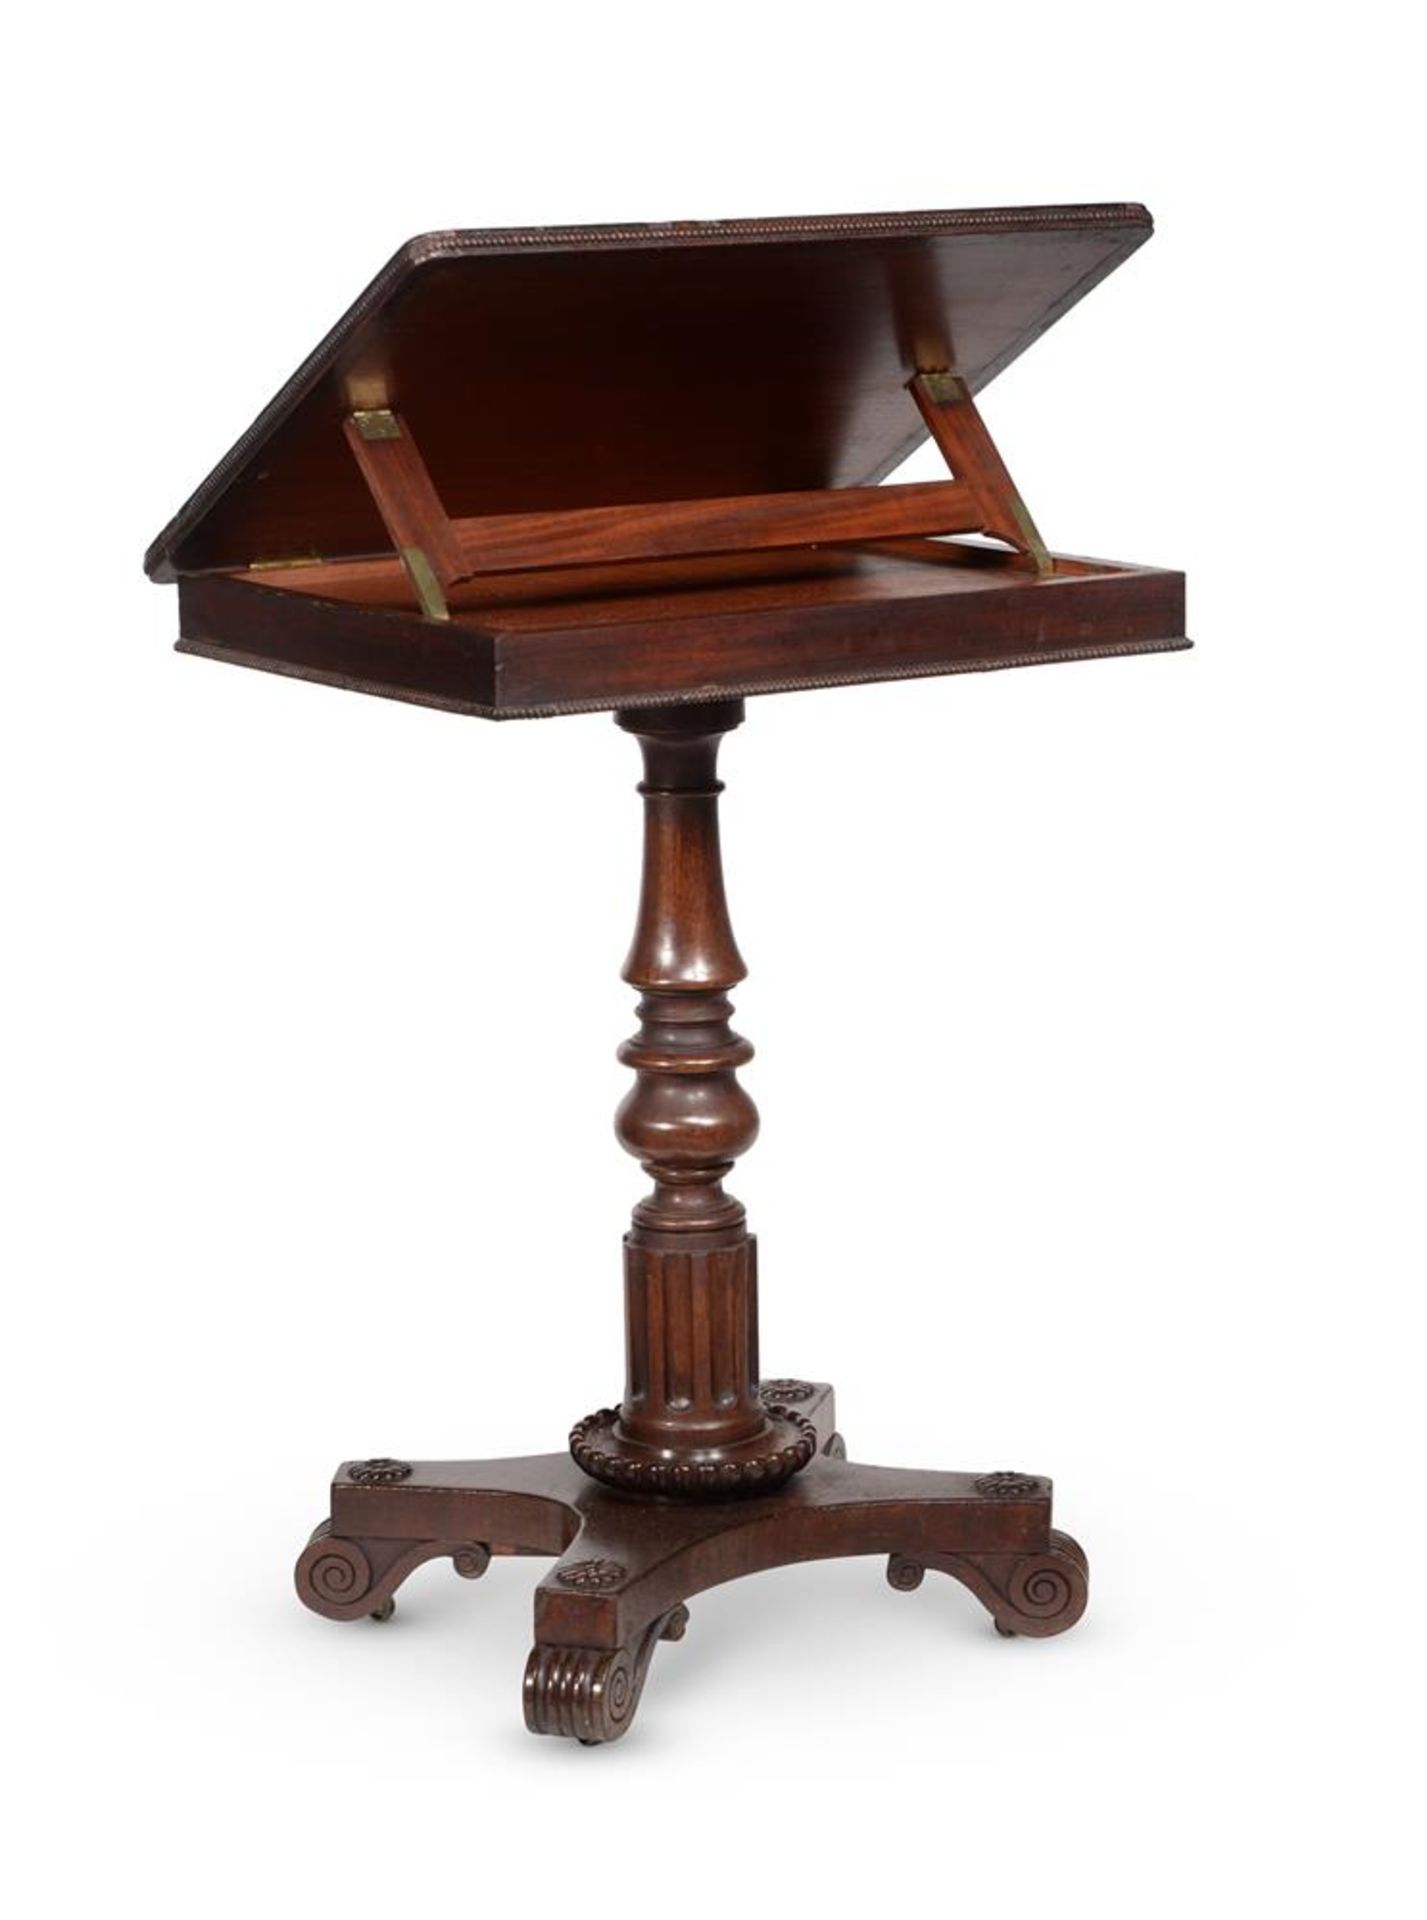 A REGENCY MAHOGANY LIBRARY READING TABLE, ATTRIBUTED TO GILLOWS, CIRCA 1815 - Image 3 of 5